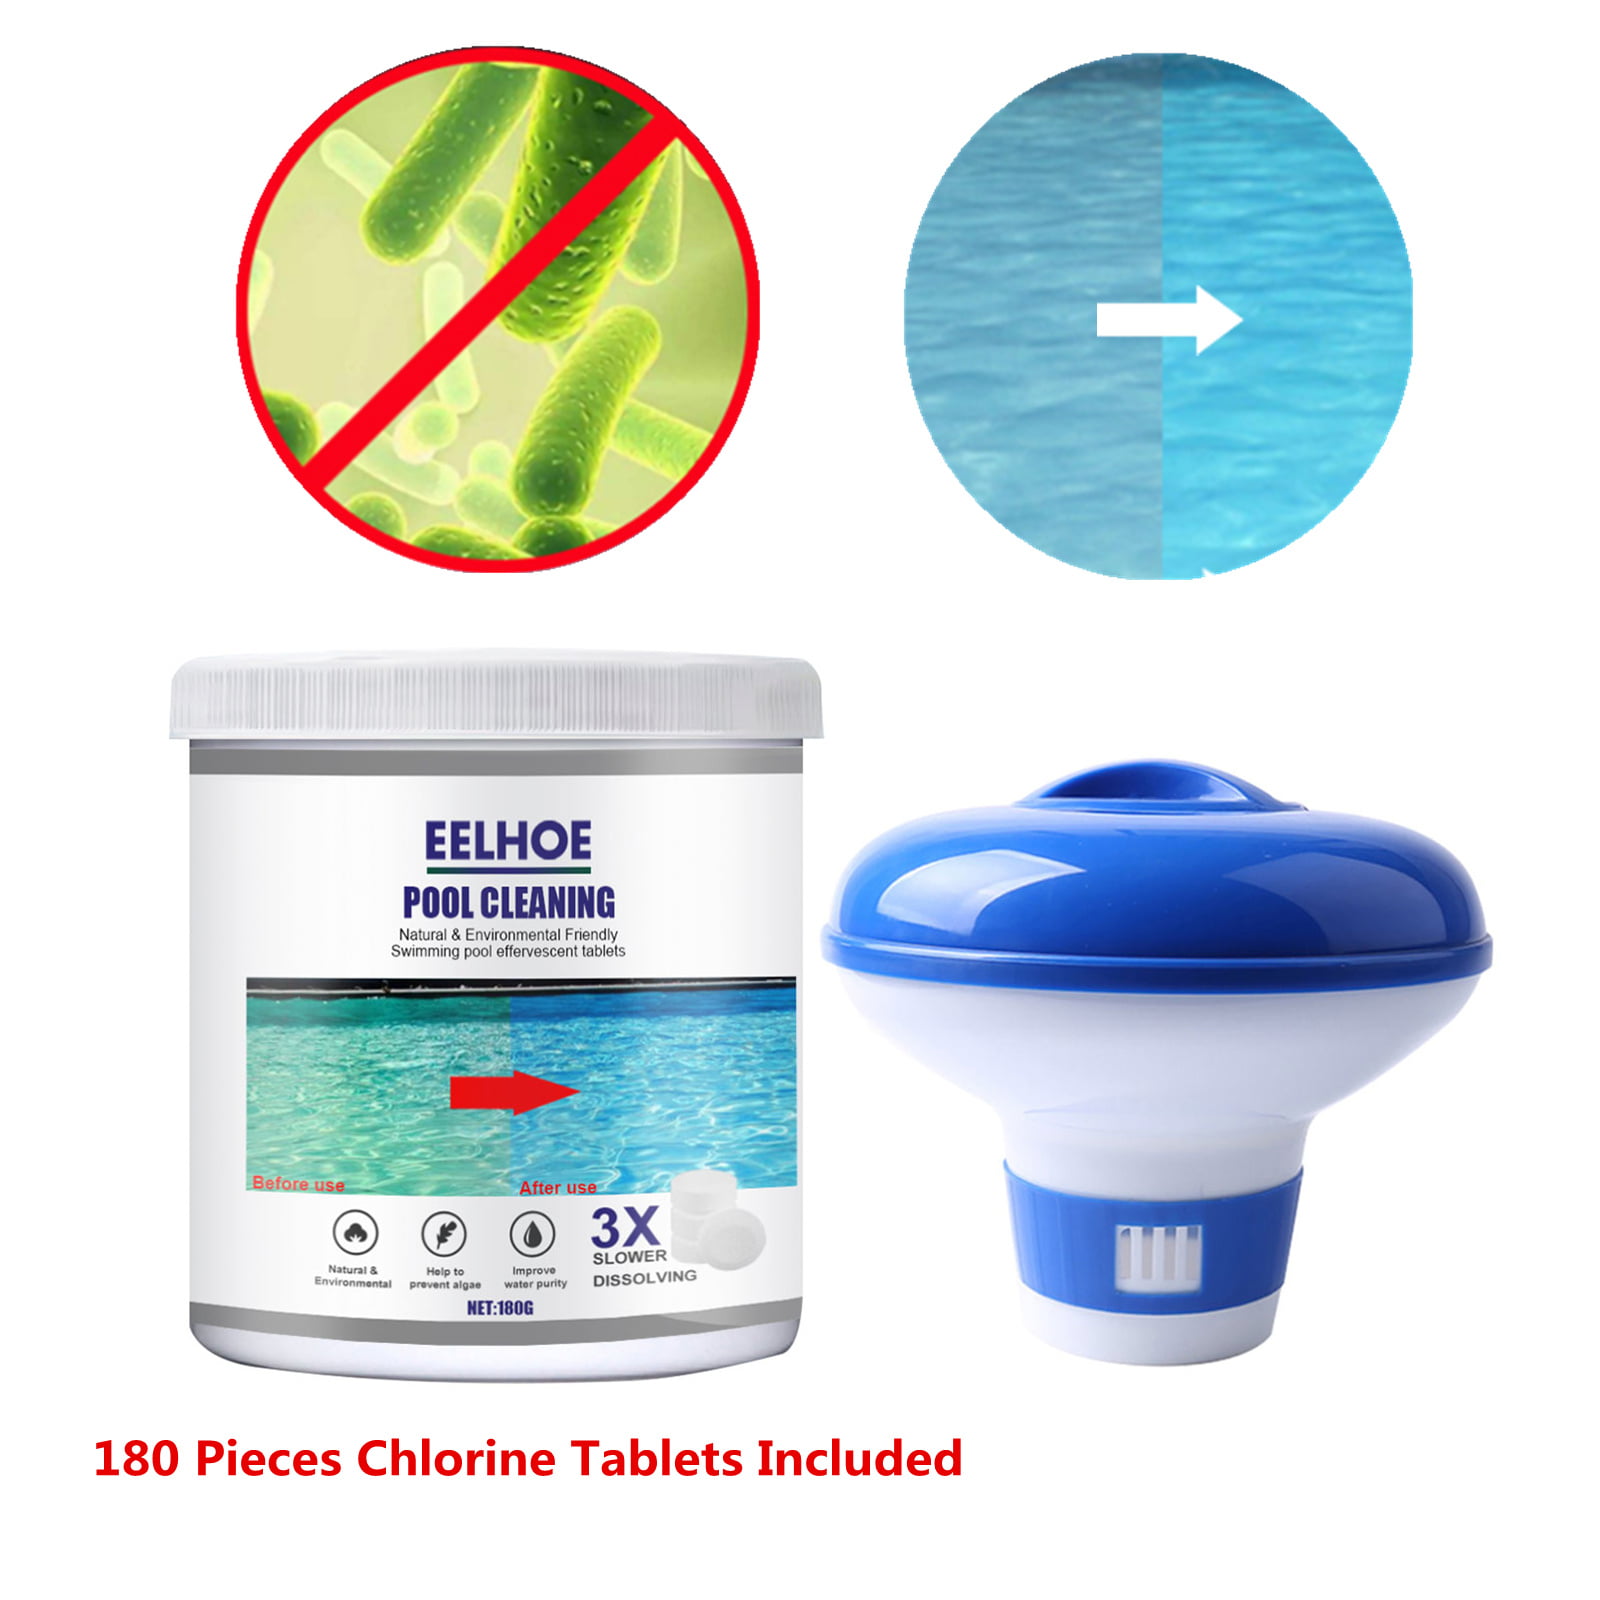 50 Premium Chlorine Tablets For Hot Tub Swimming Pool Spa Cleaning Jacuzzi 